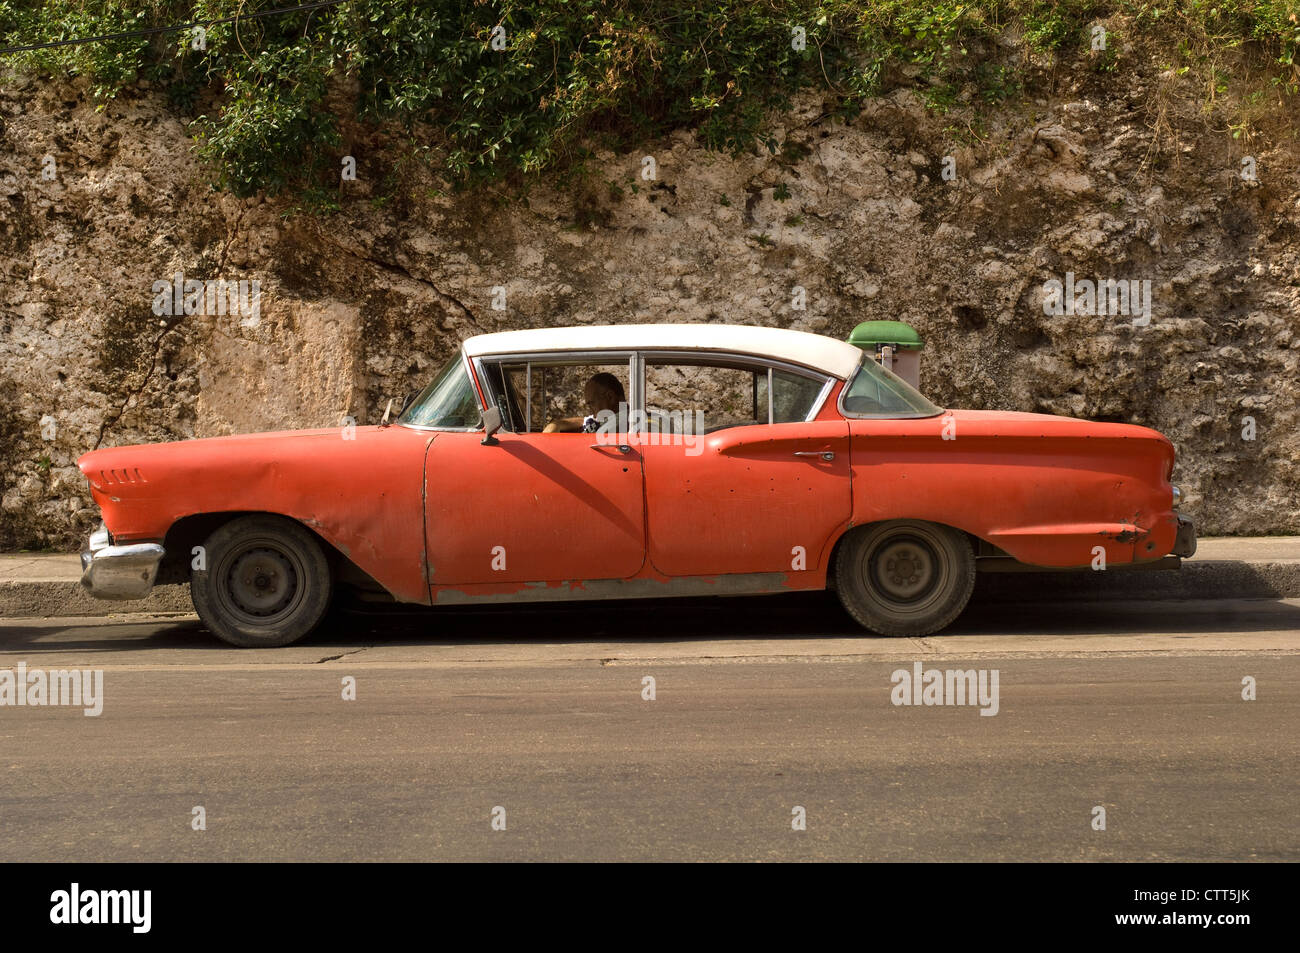 Old 1950's American car, possibly a Lincoln, parked in a side street in Havana, Cuba Stock Photo